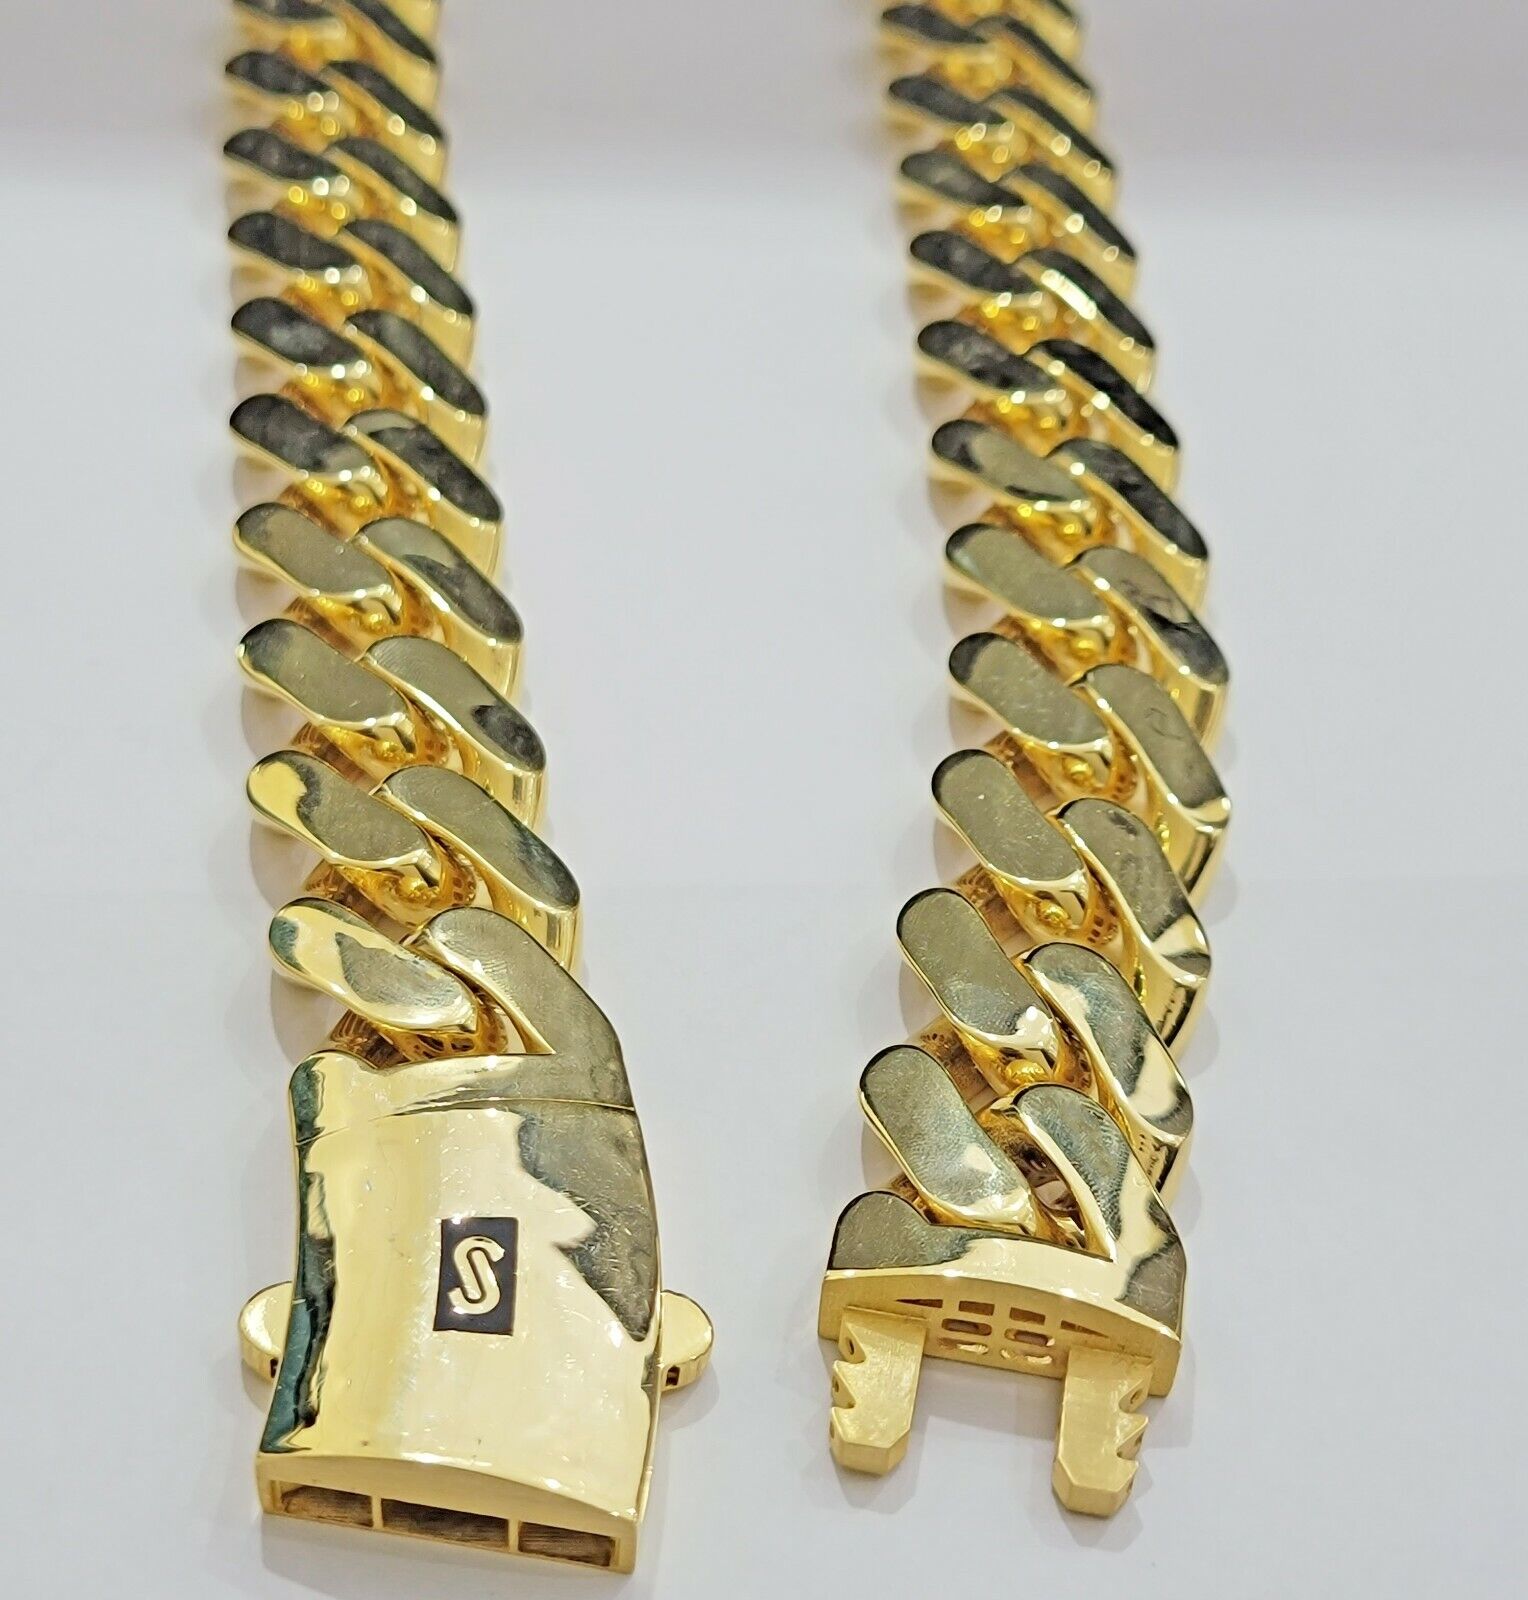 Real 10k Gold Chain Miami Cuban Royal Link 24mm Thick 30